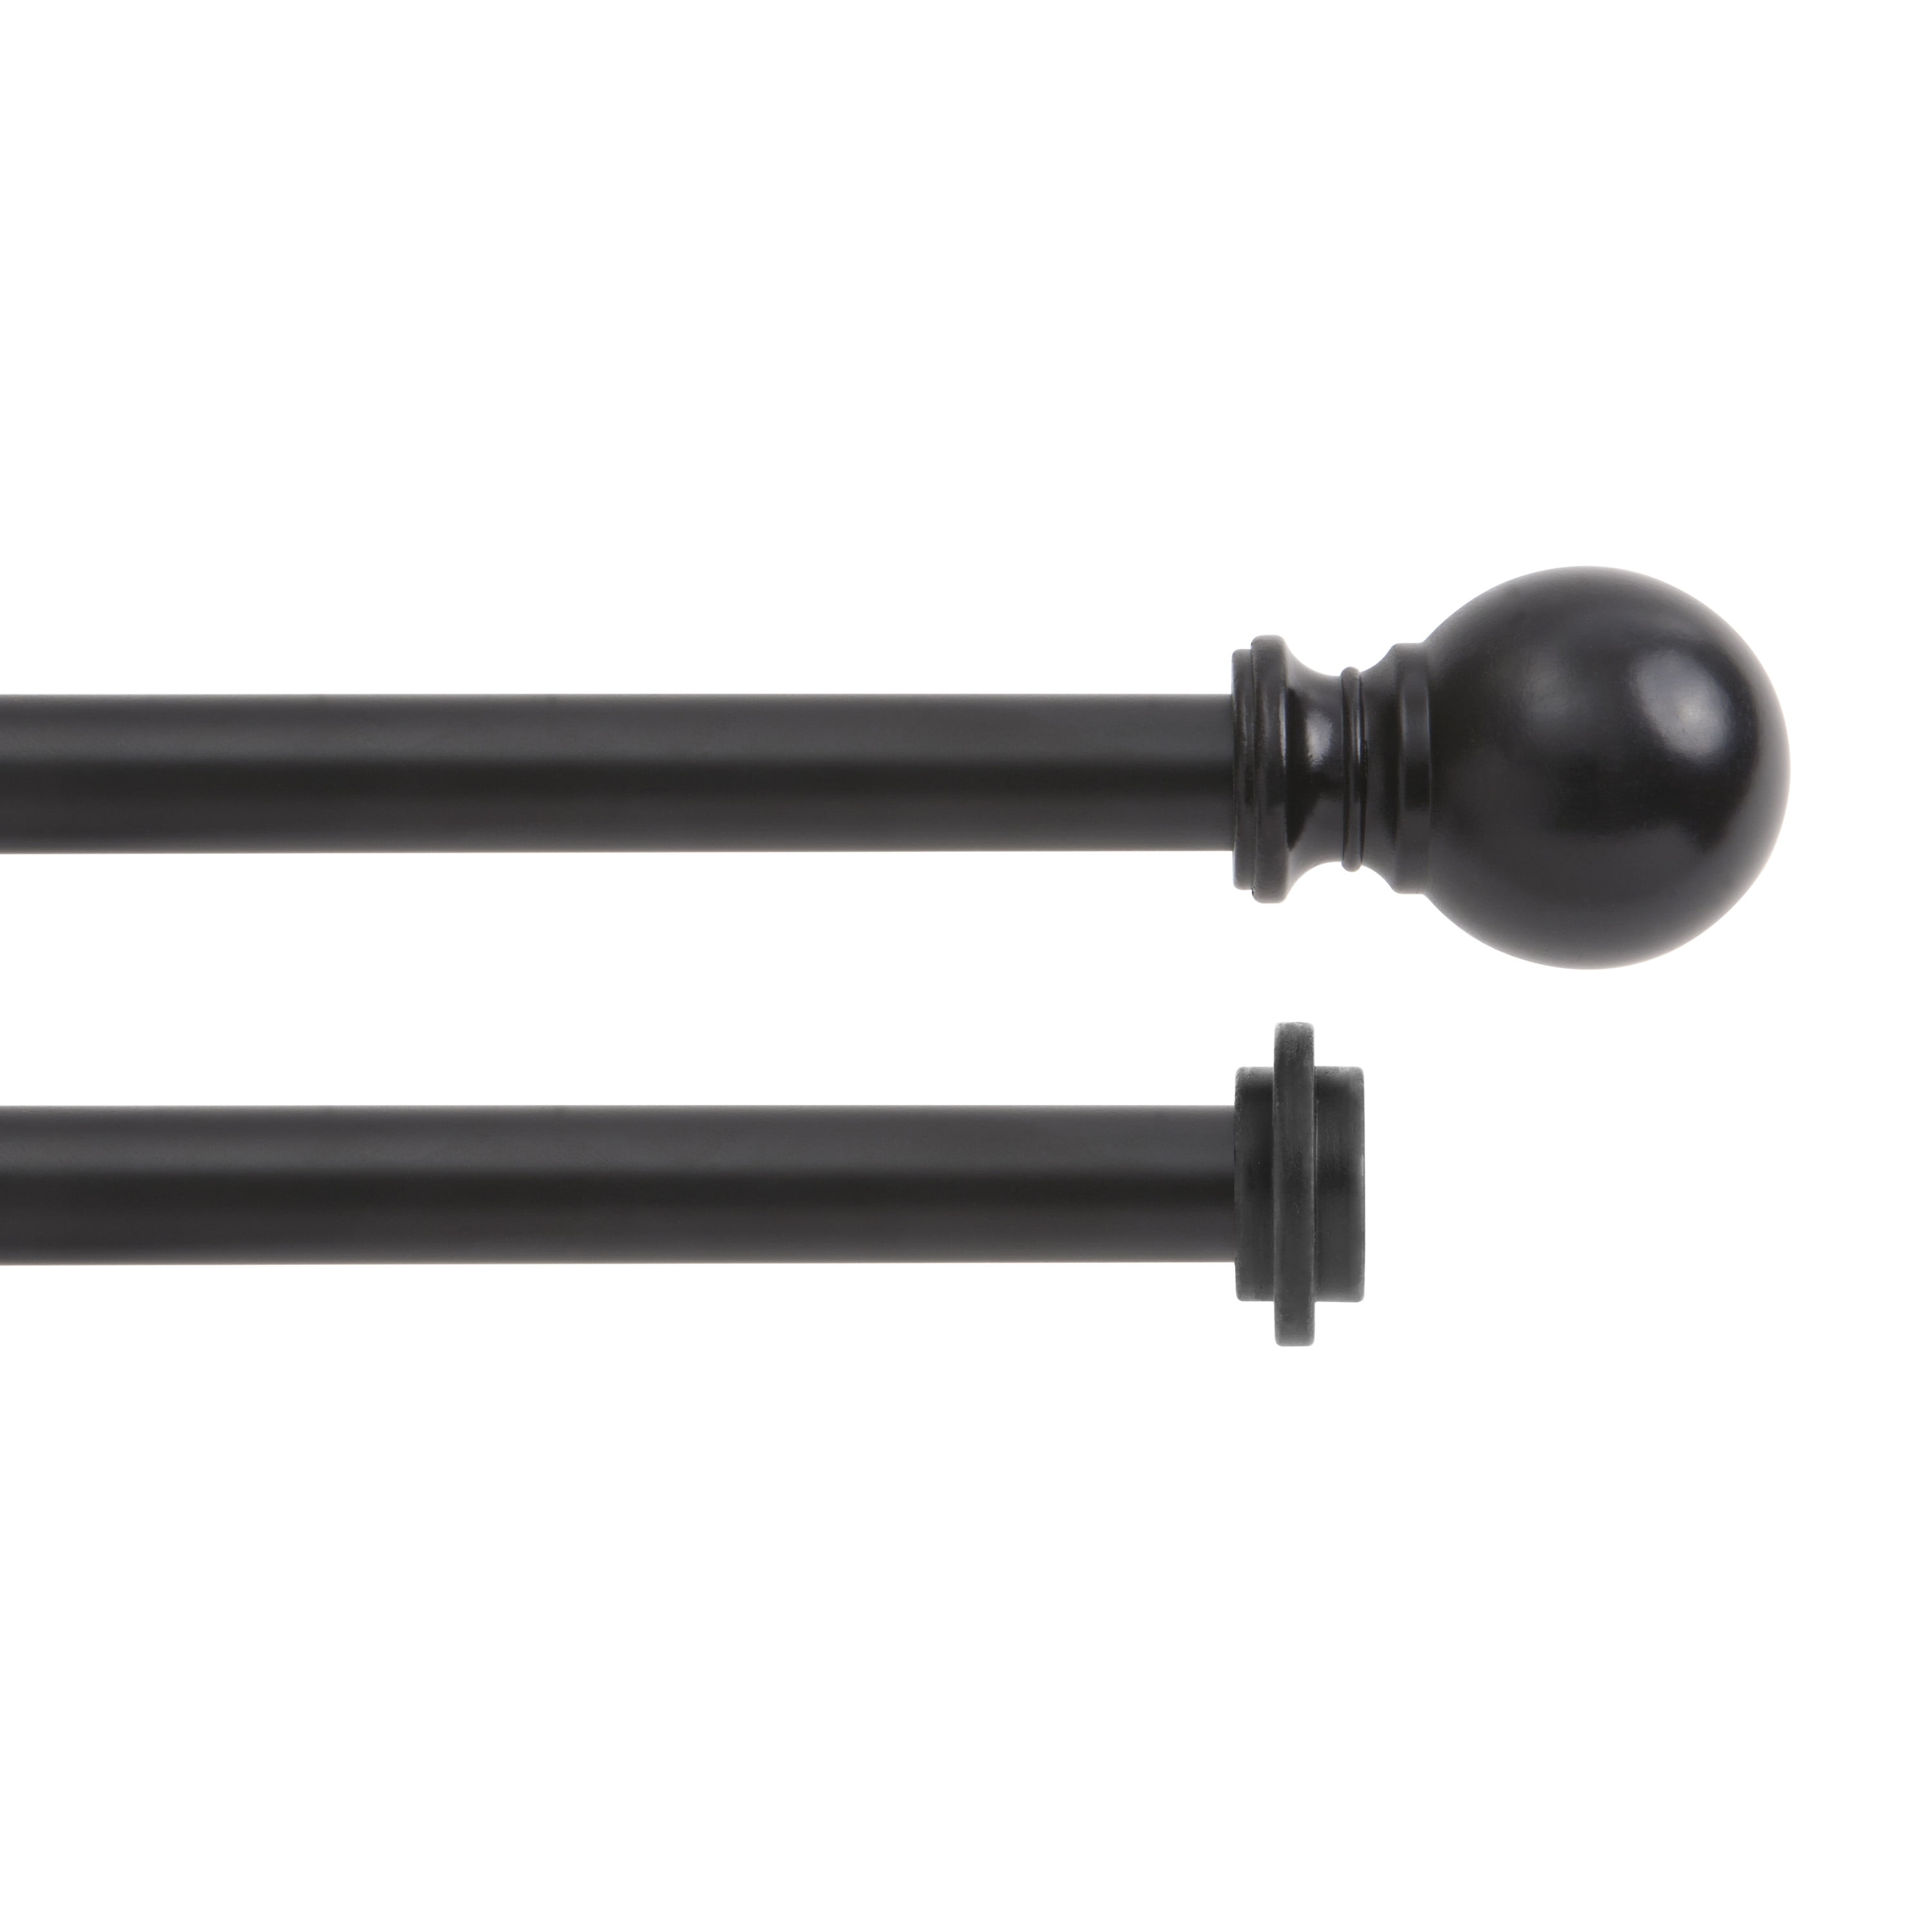 Ycolnaefllr 1 Inch Diameter Double Curtain Rod Set Heavy Duty for Windows Decorative Drapery Rods Adjustable Length from 48 to 84 Inch Resin Finials with Curtain Holdbacks Oil Rubbed Bronze